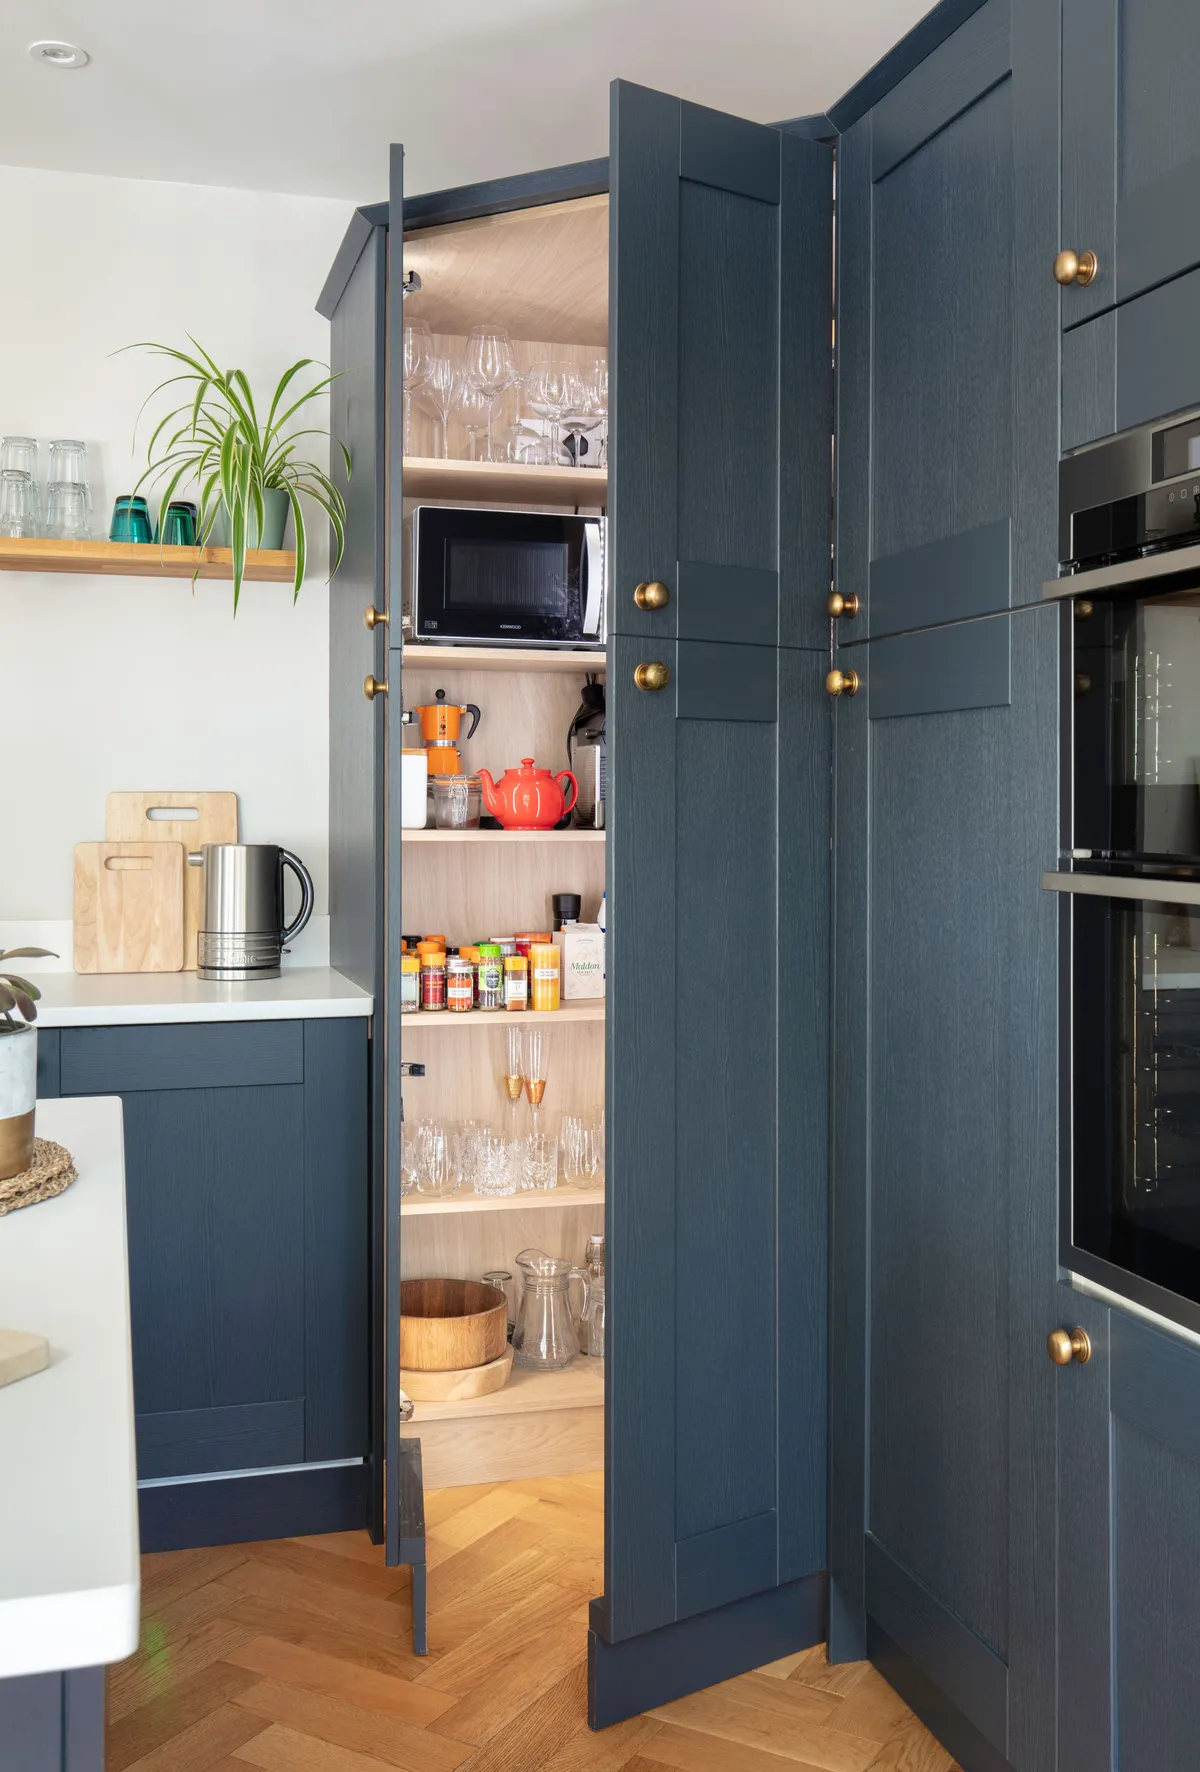 If you’re a keen cook, plan plenty of storage into your kitchen refurb, as Sara has with her dreamy walk-in pantry